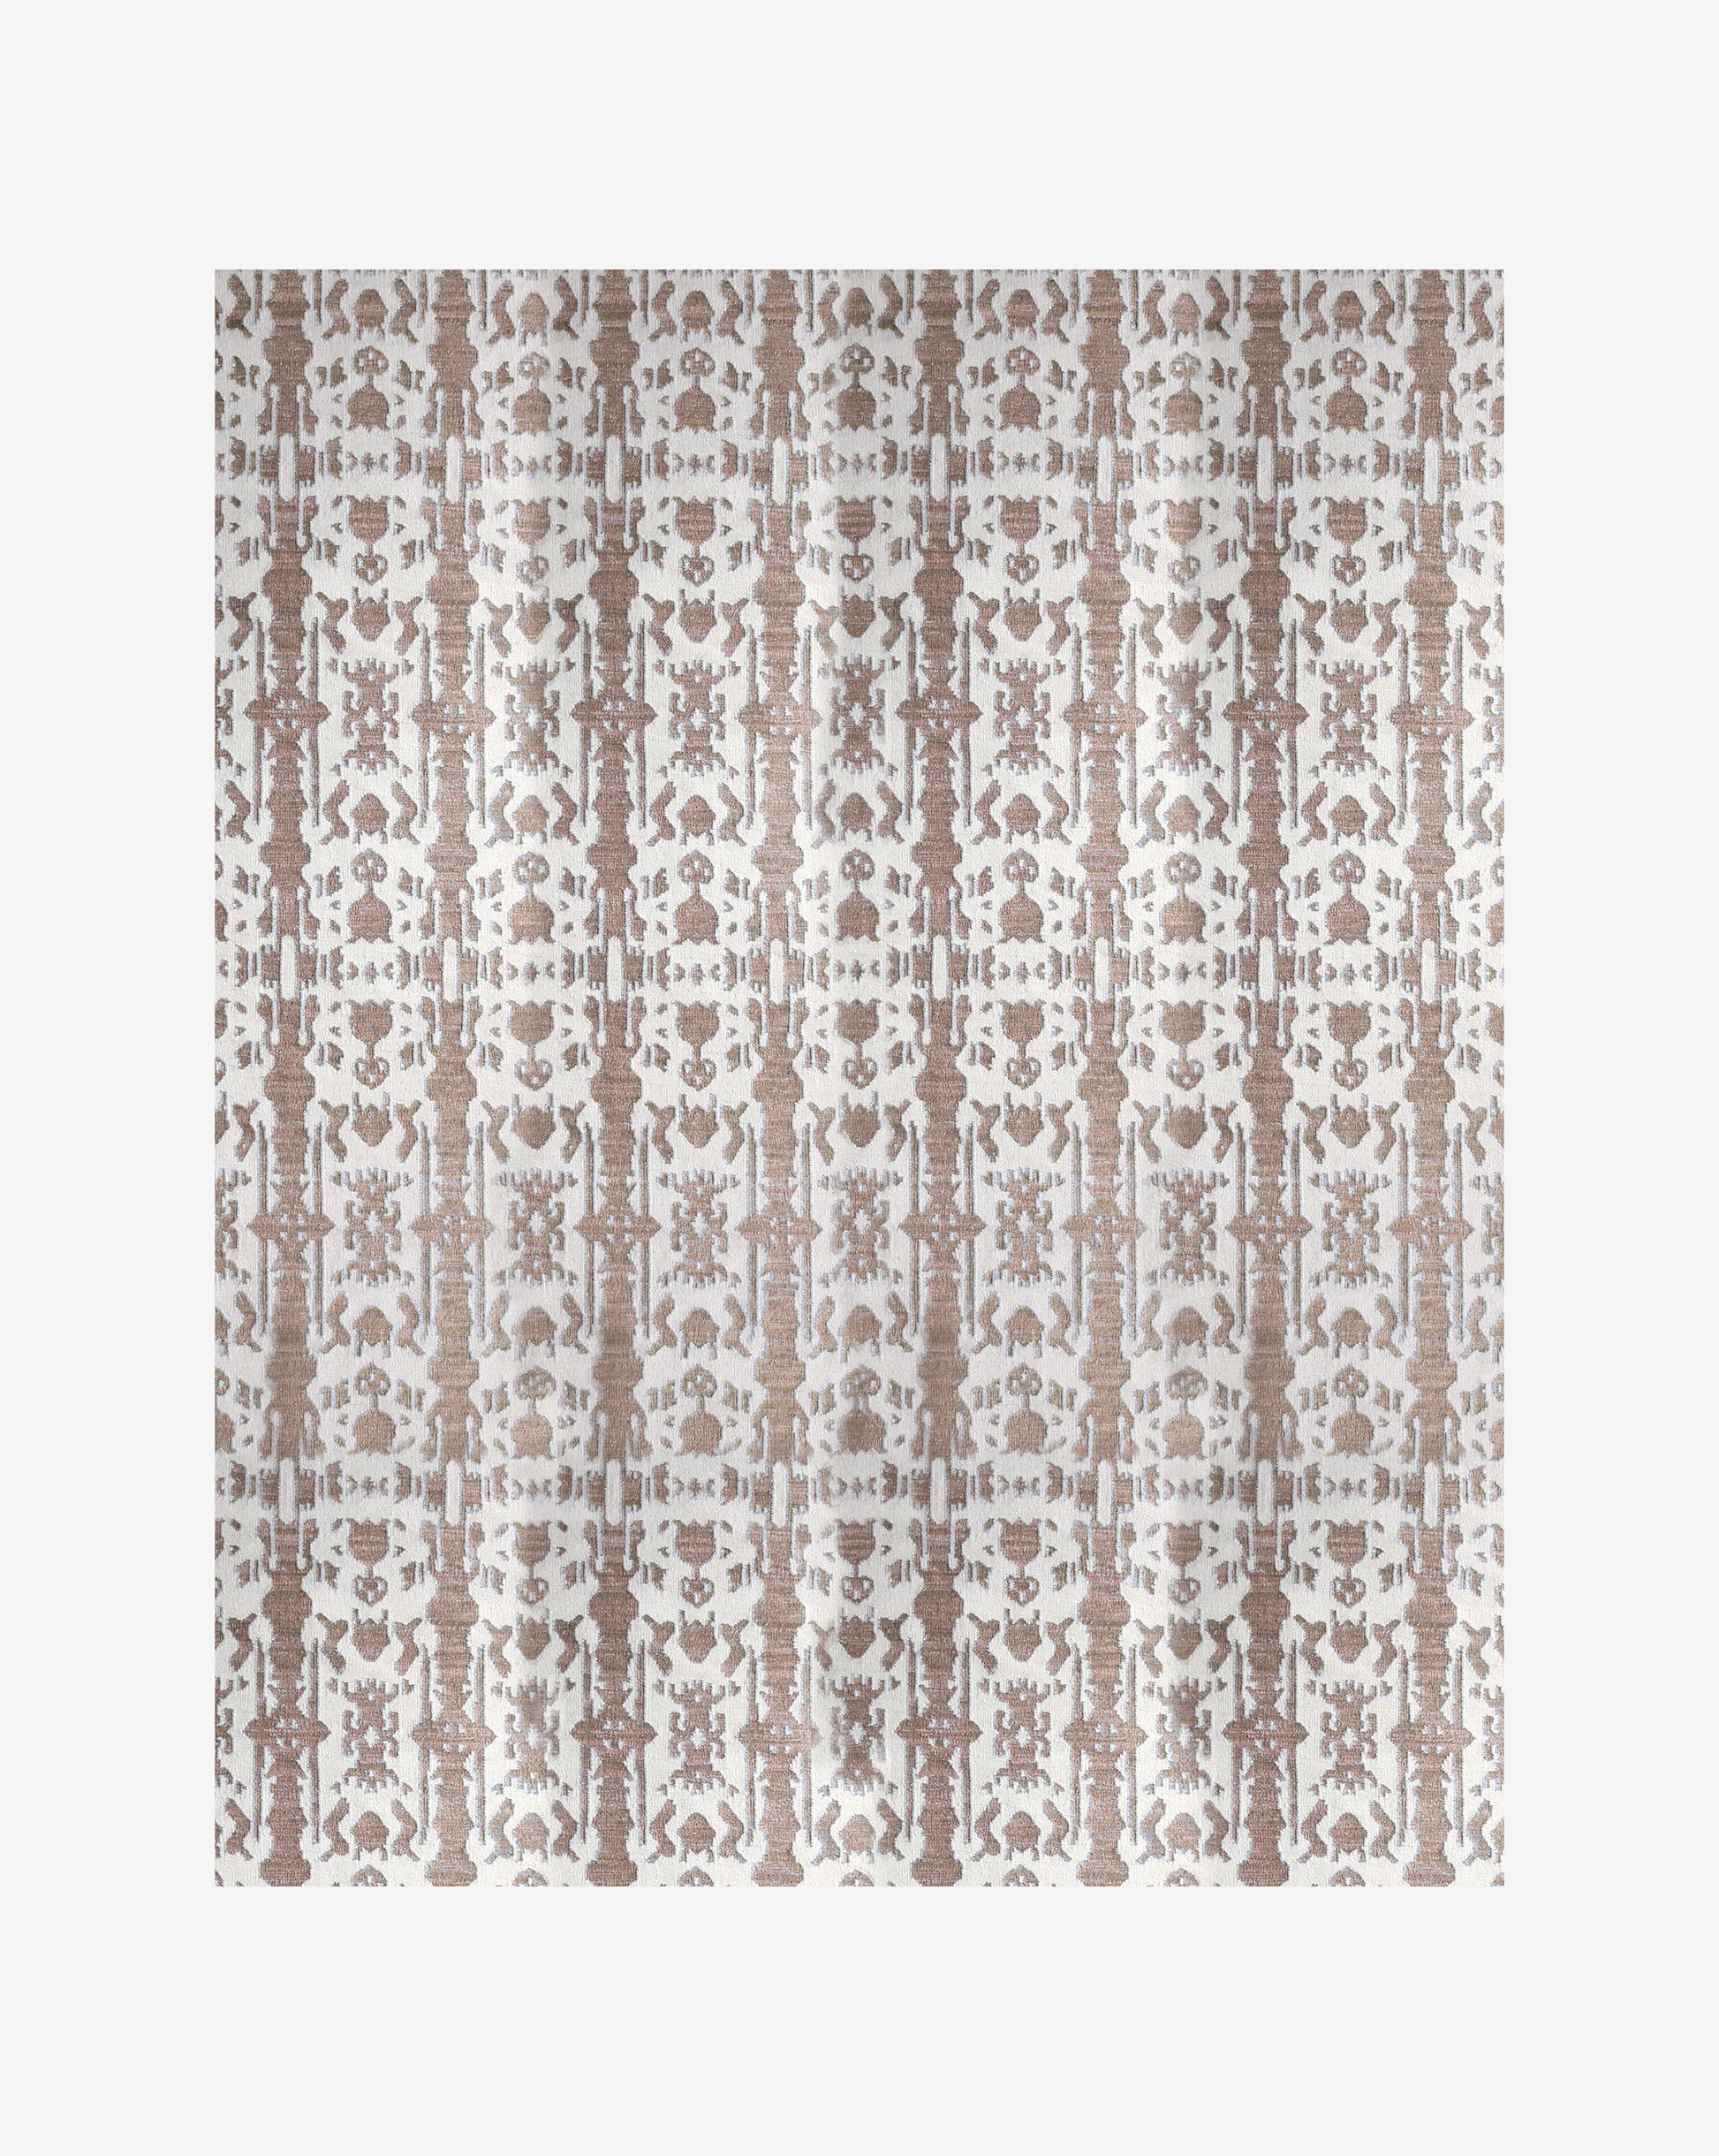 A brown and white pattern on a Biami Flatweave Rug Hide in the Biami colorway